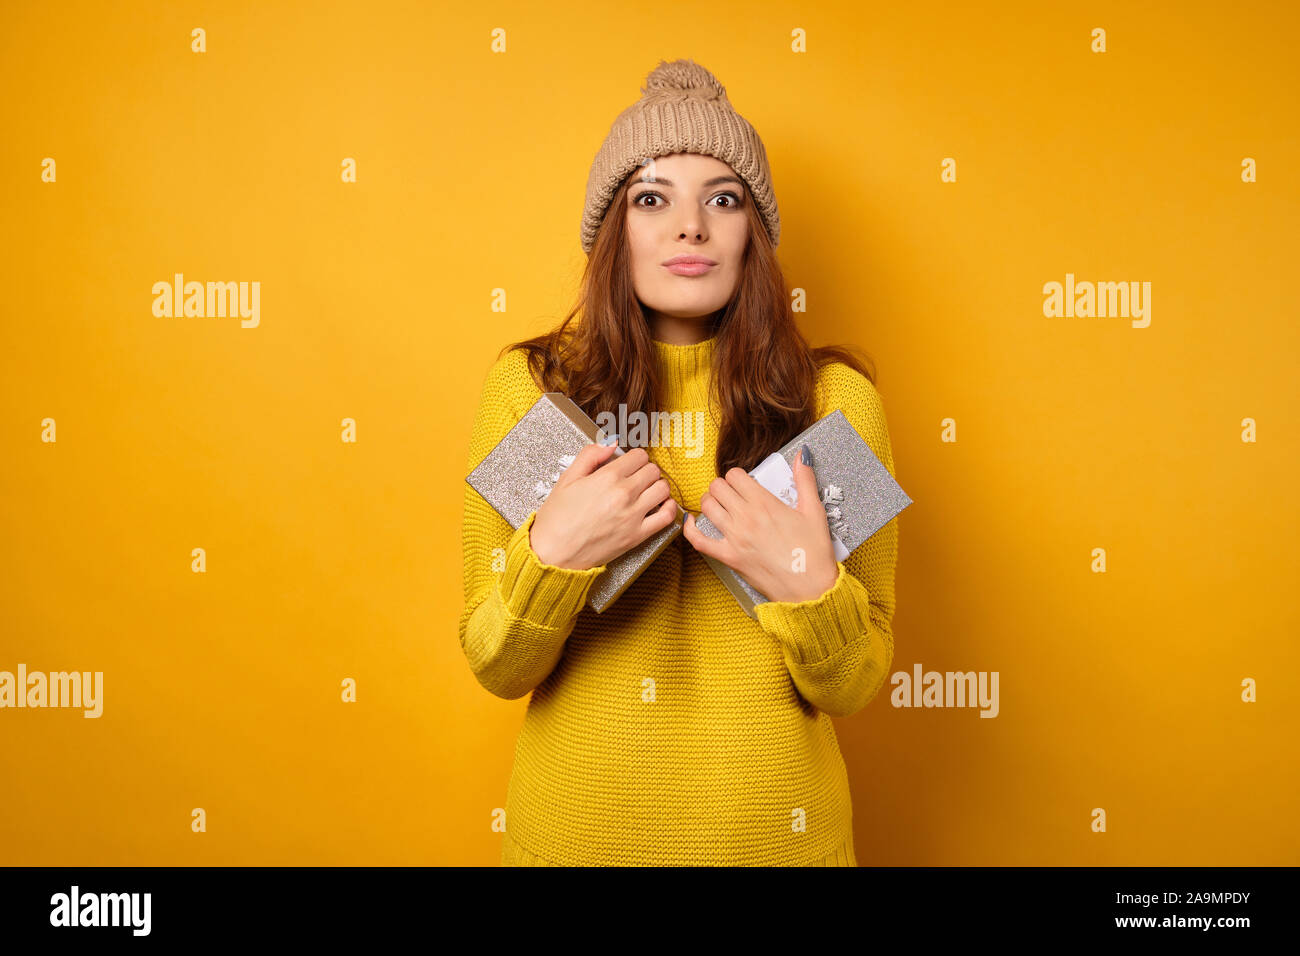 The brunette stands in a yellow sweater and hat, presses gift boxes to herself, looking into the frame with wide eyes. Stock Photo